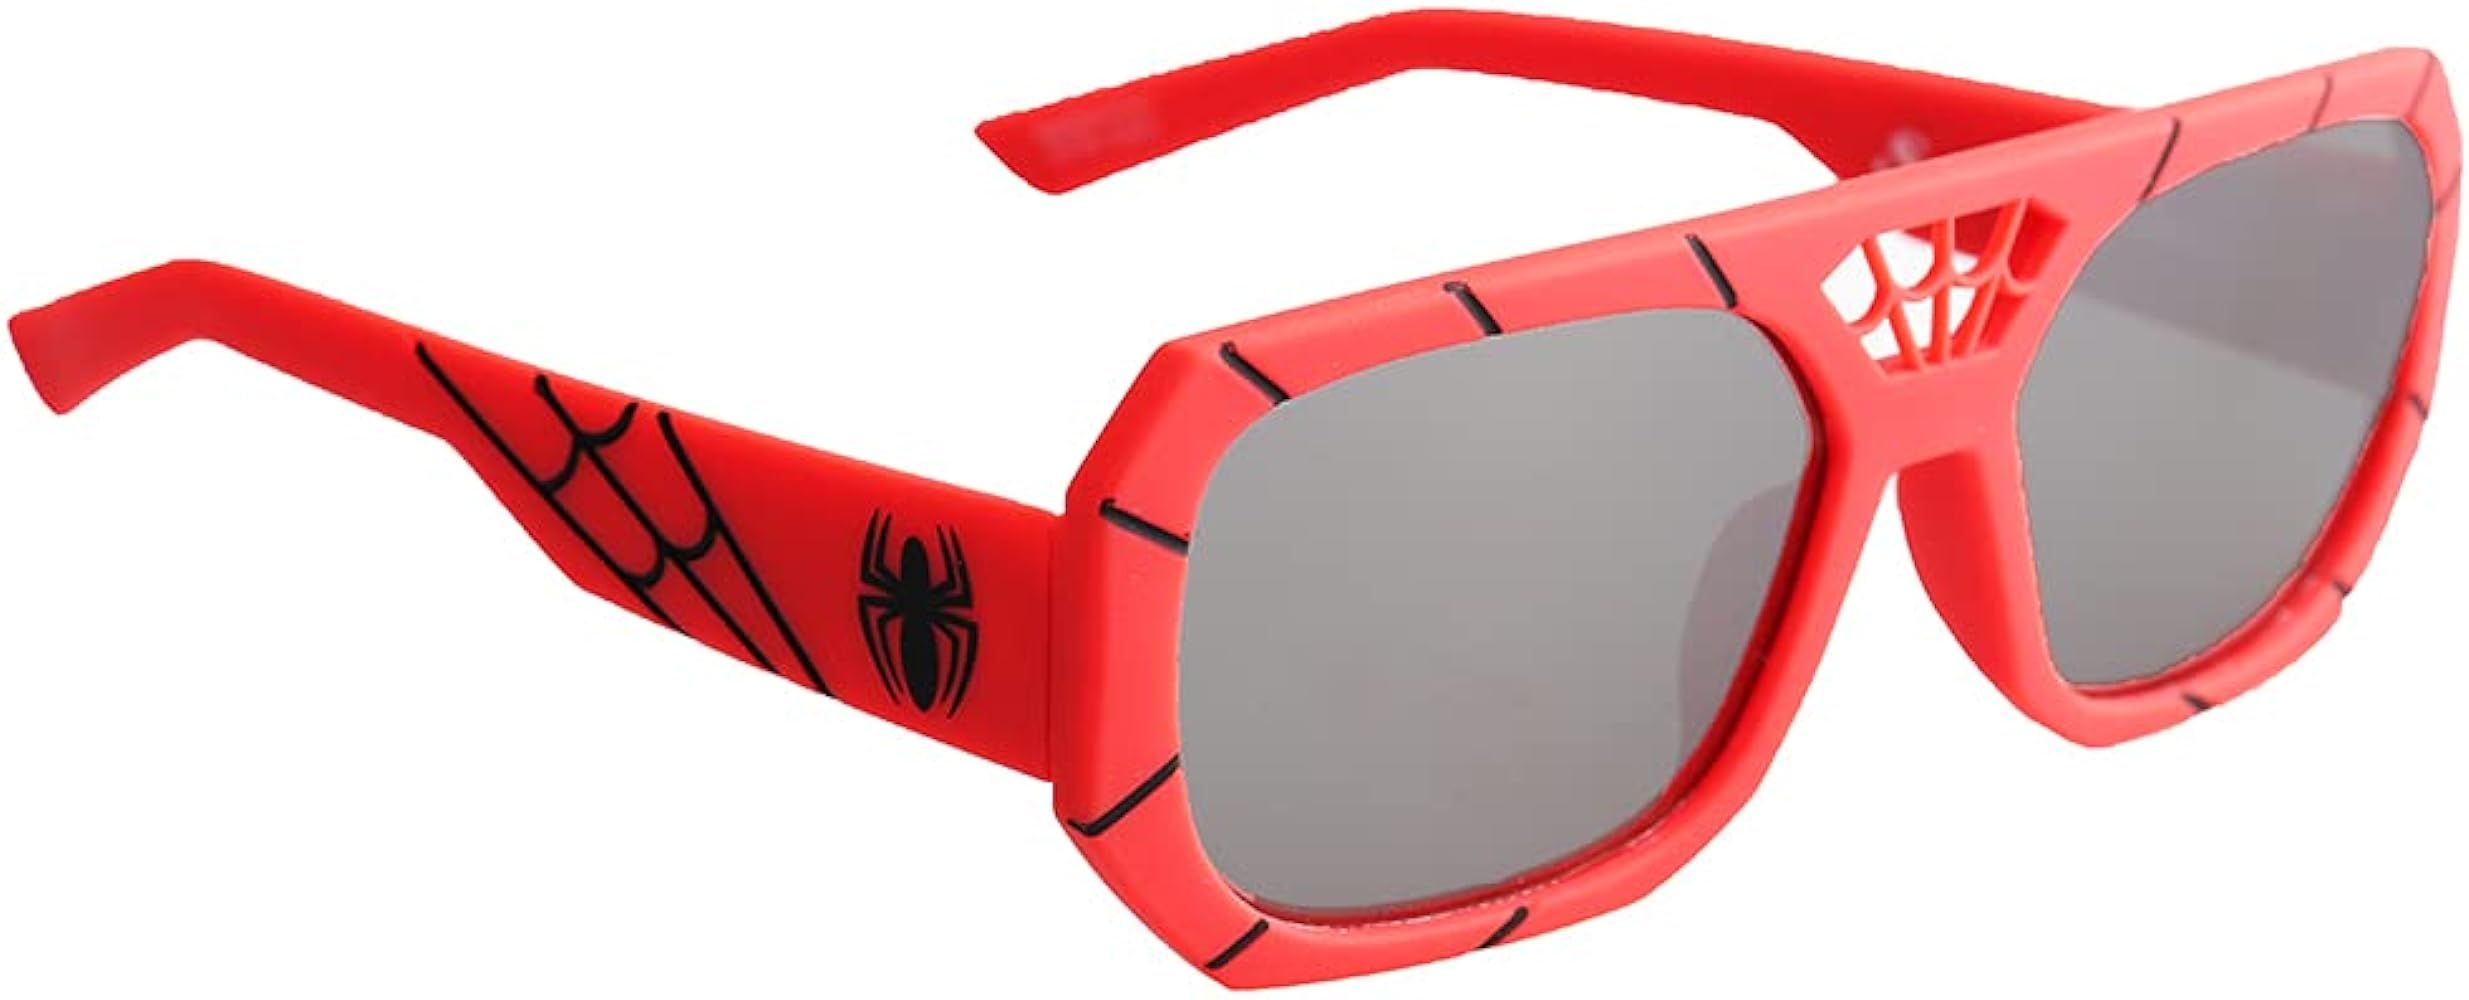 Sun-Staches Spider-man Child Sunglasses, UV400, Red Web frames, One Size Fits Most Kids | Amazon (US)